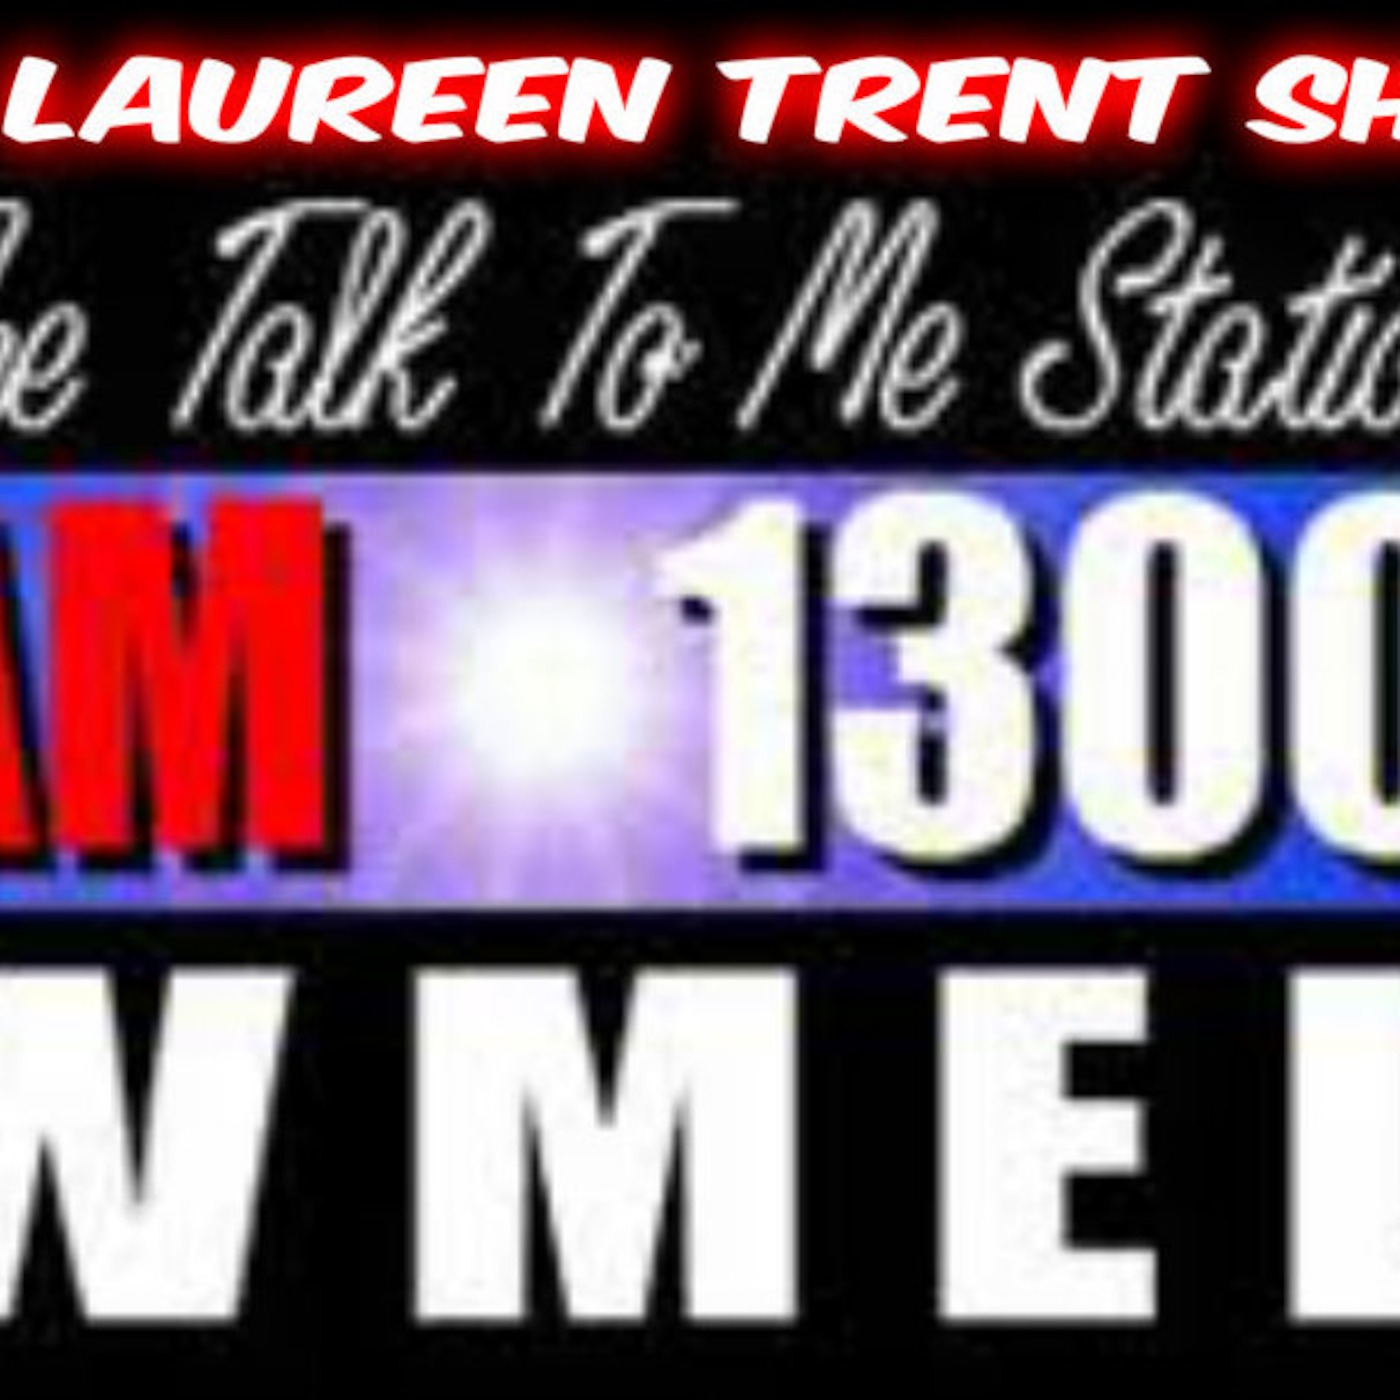 Laureen Trent Show Special Guest   Matt Nye  Candidate for Brevard County Commission District 4